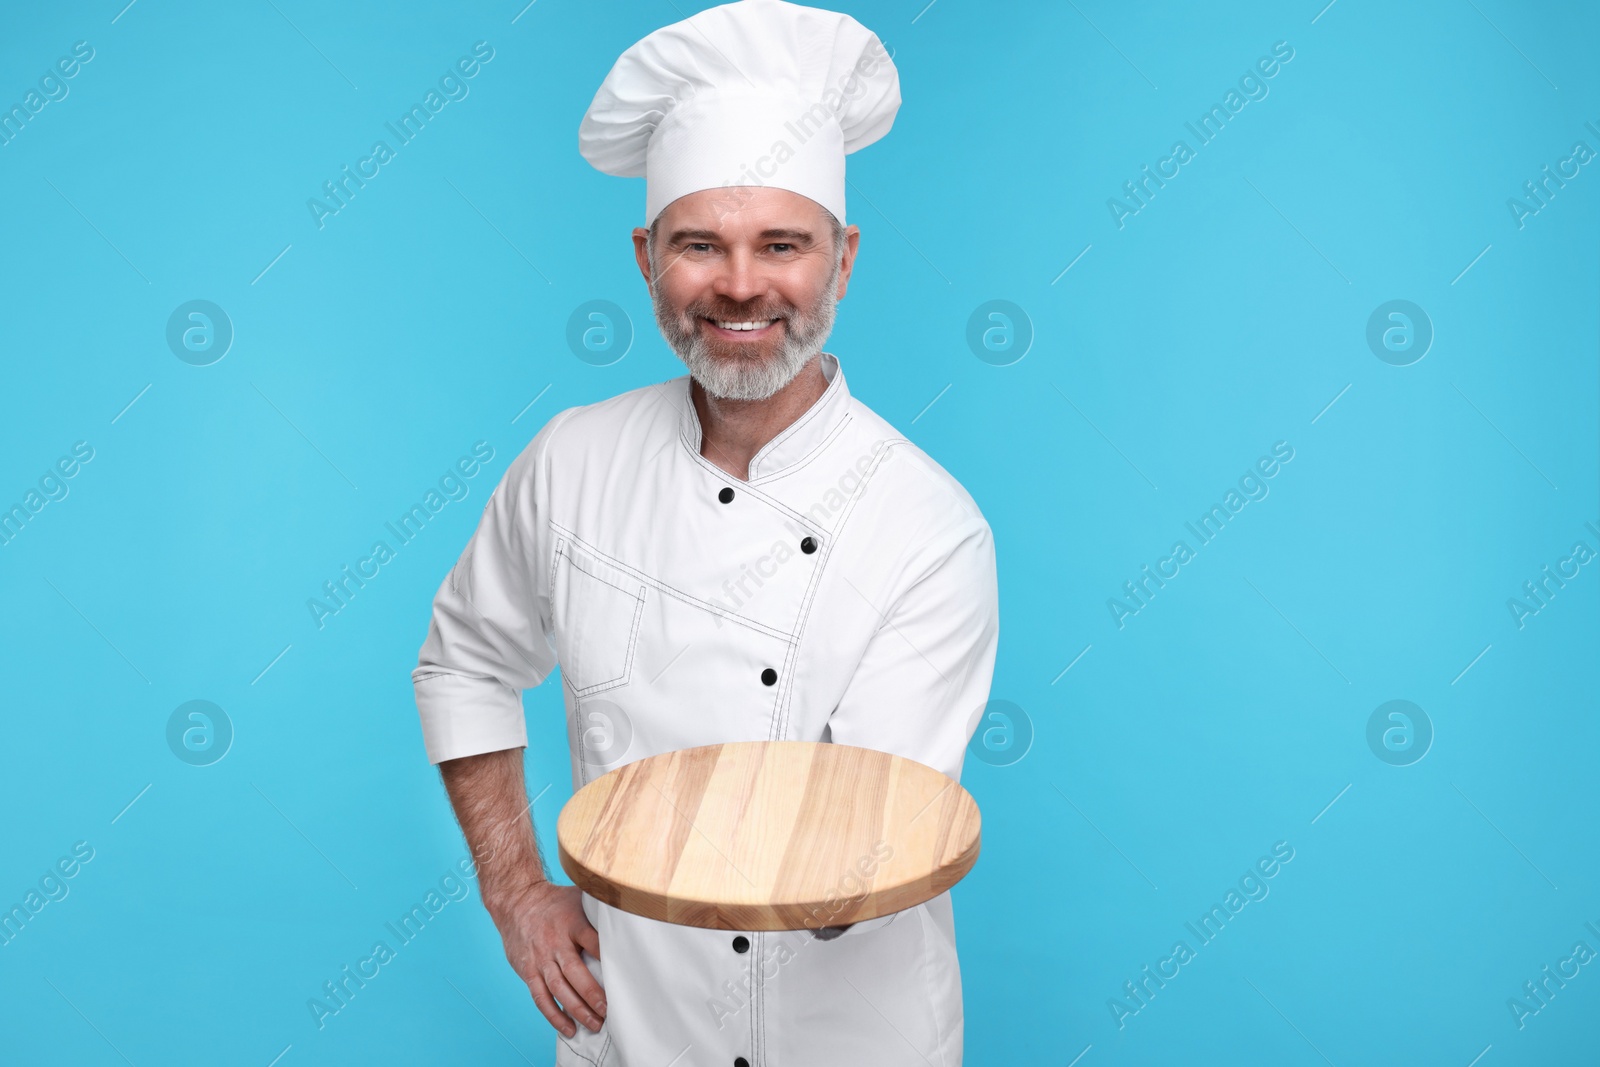 Photo of Happy chef in uniform with wooden board on light blue background